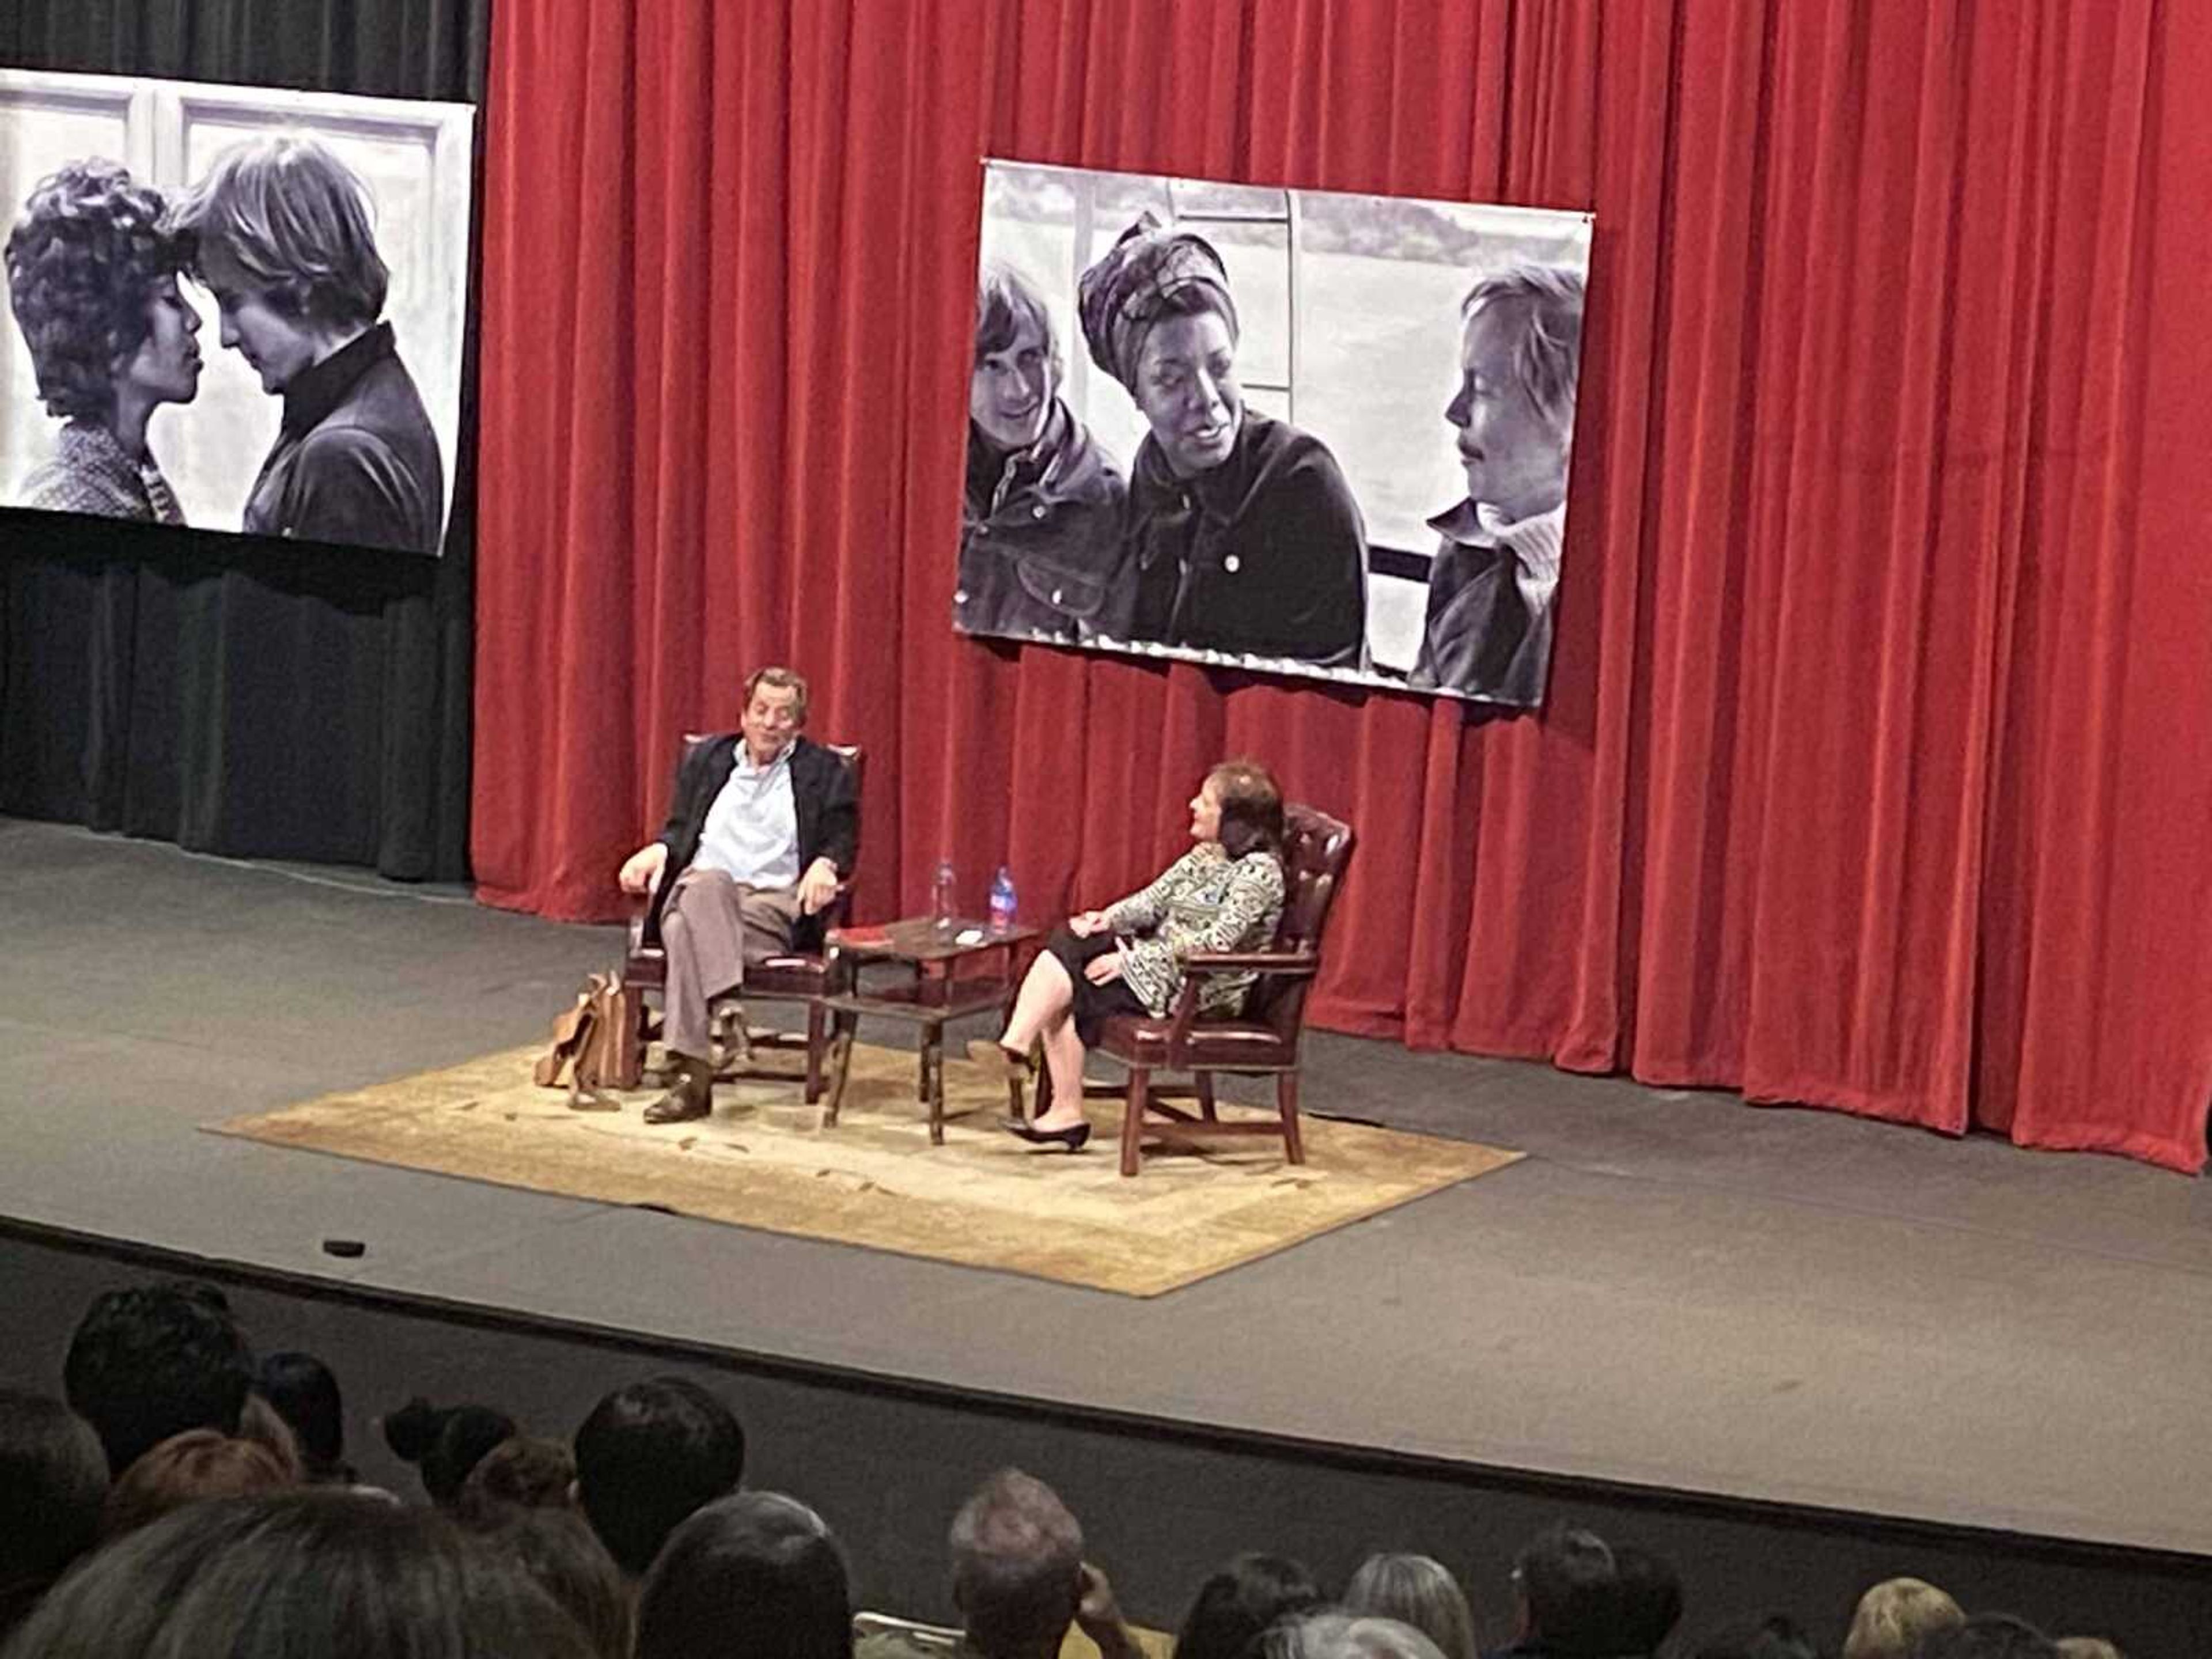 Actor Dirk Benedict and Mass Media professor Karie Hollerbach talk at the "See Me Series" on Wednesday, April 6. They discussed Benedict's role in the film and what it was like to work with Maya Angelou.